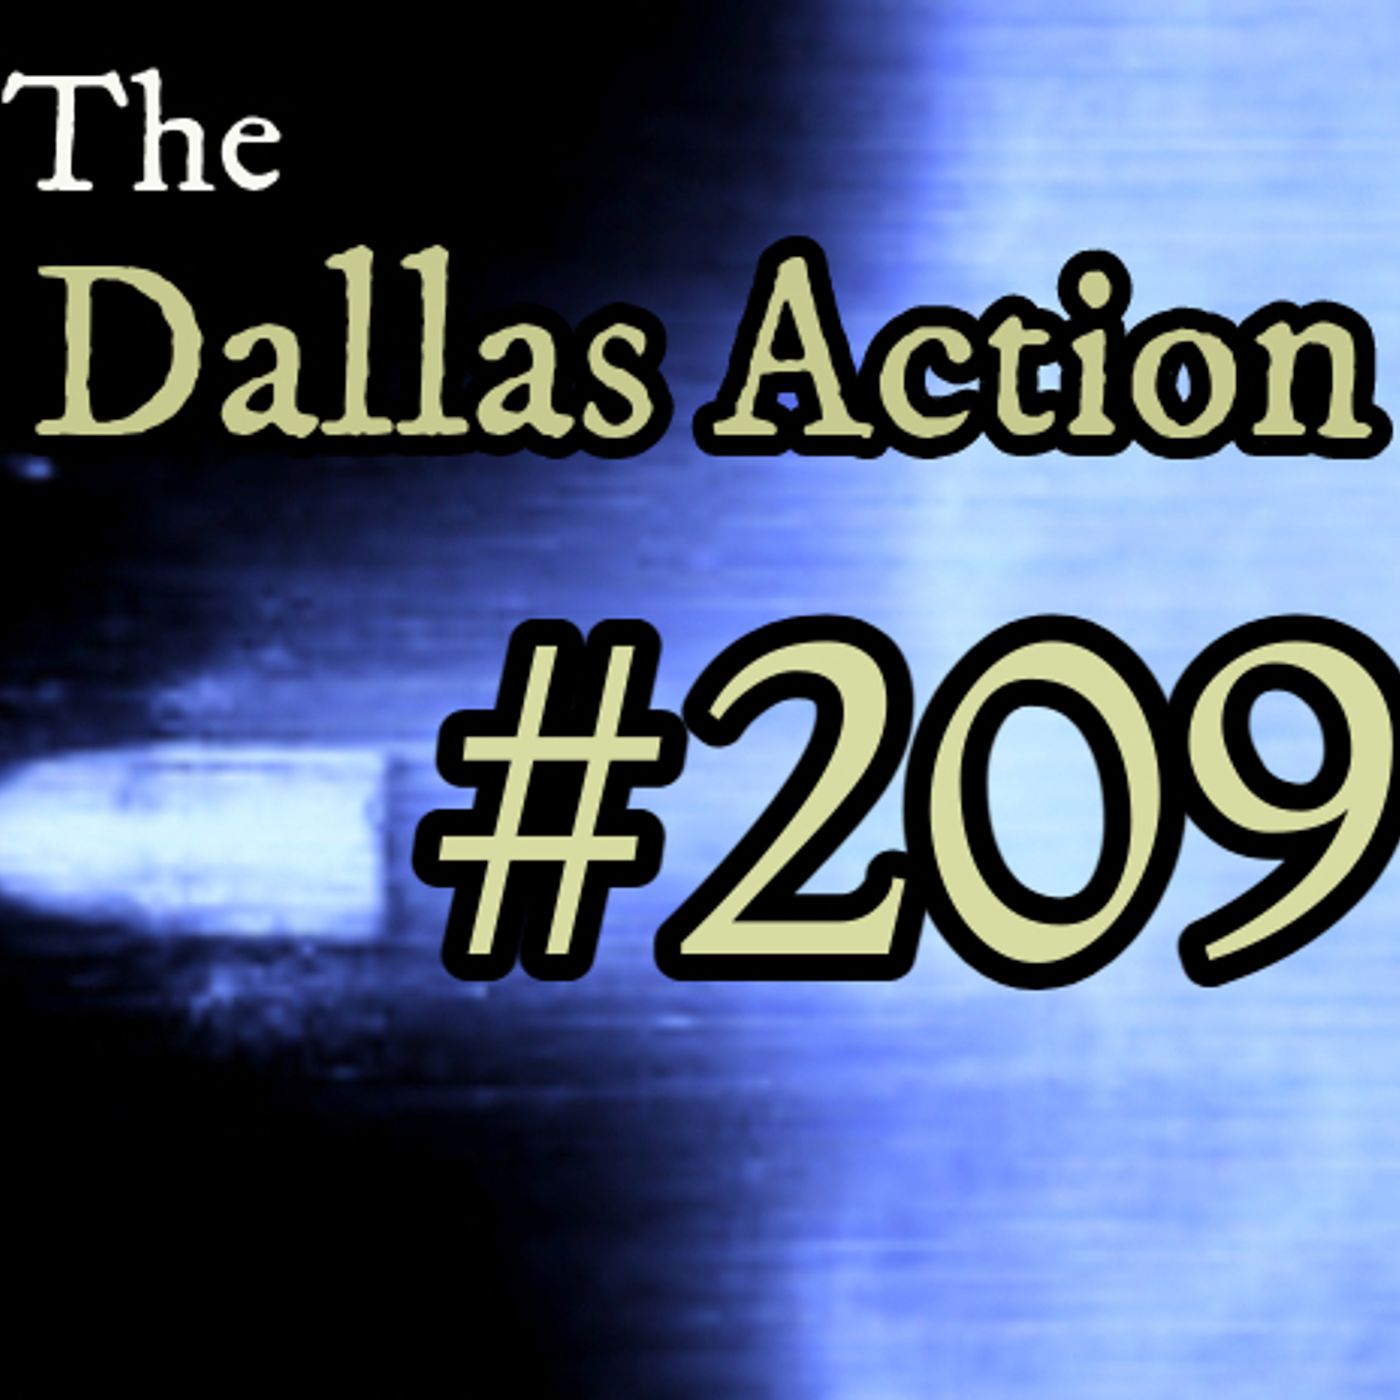 #209~Feb.24, 2024: " 'Alleged Facts' And The JFK Hit: What We Now Know Vs. What We Once Believed", With ALAN DALE.